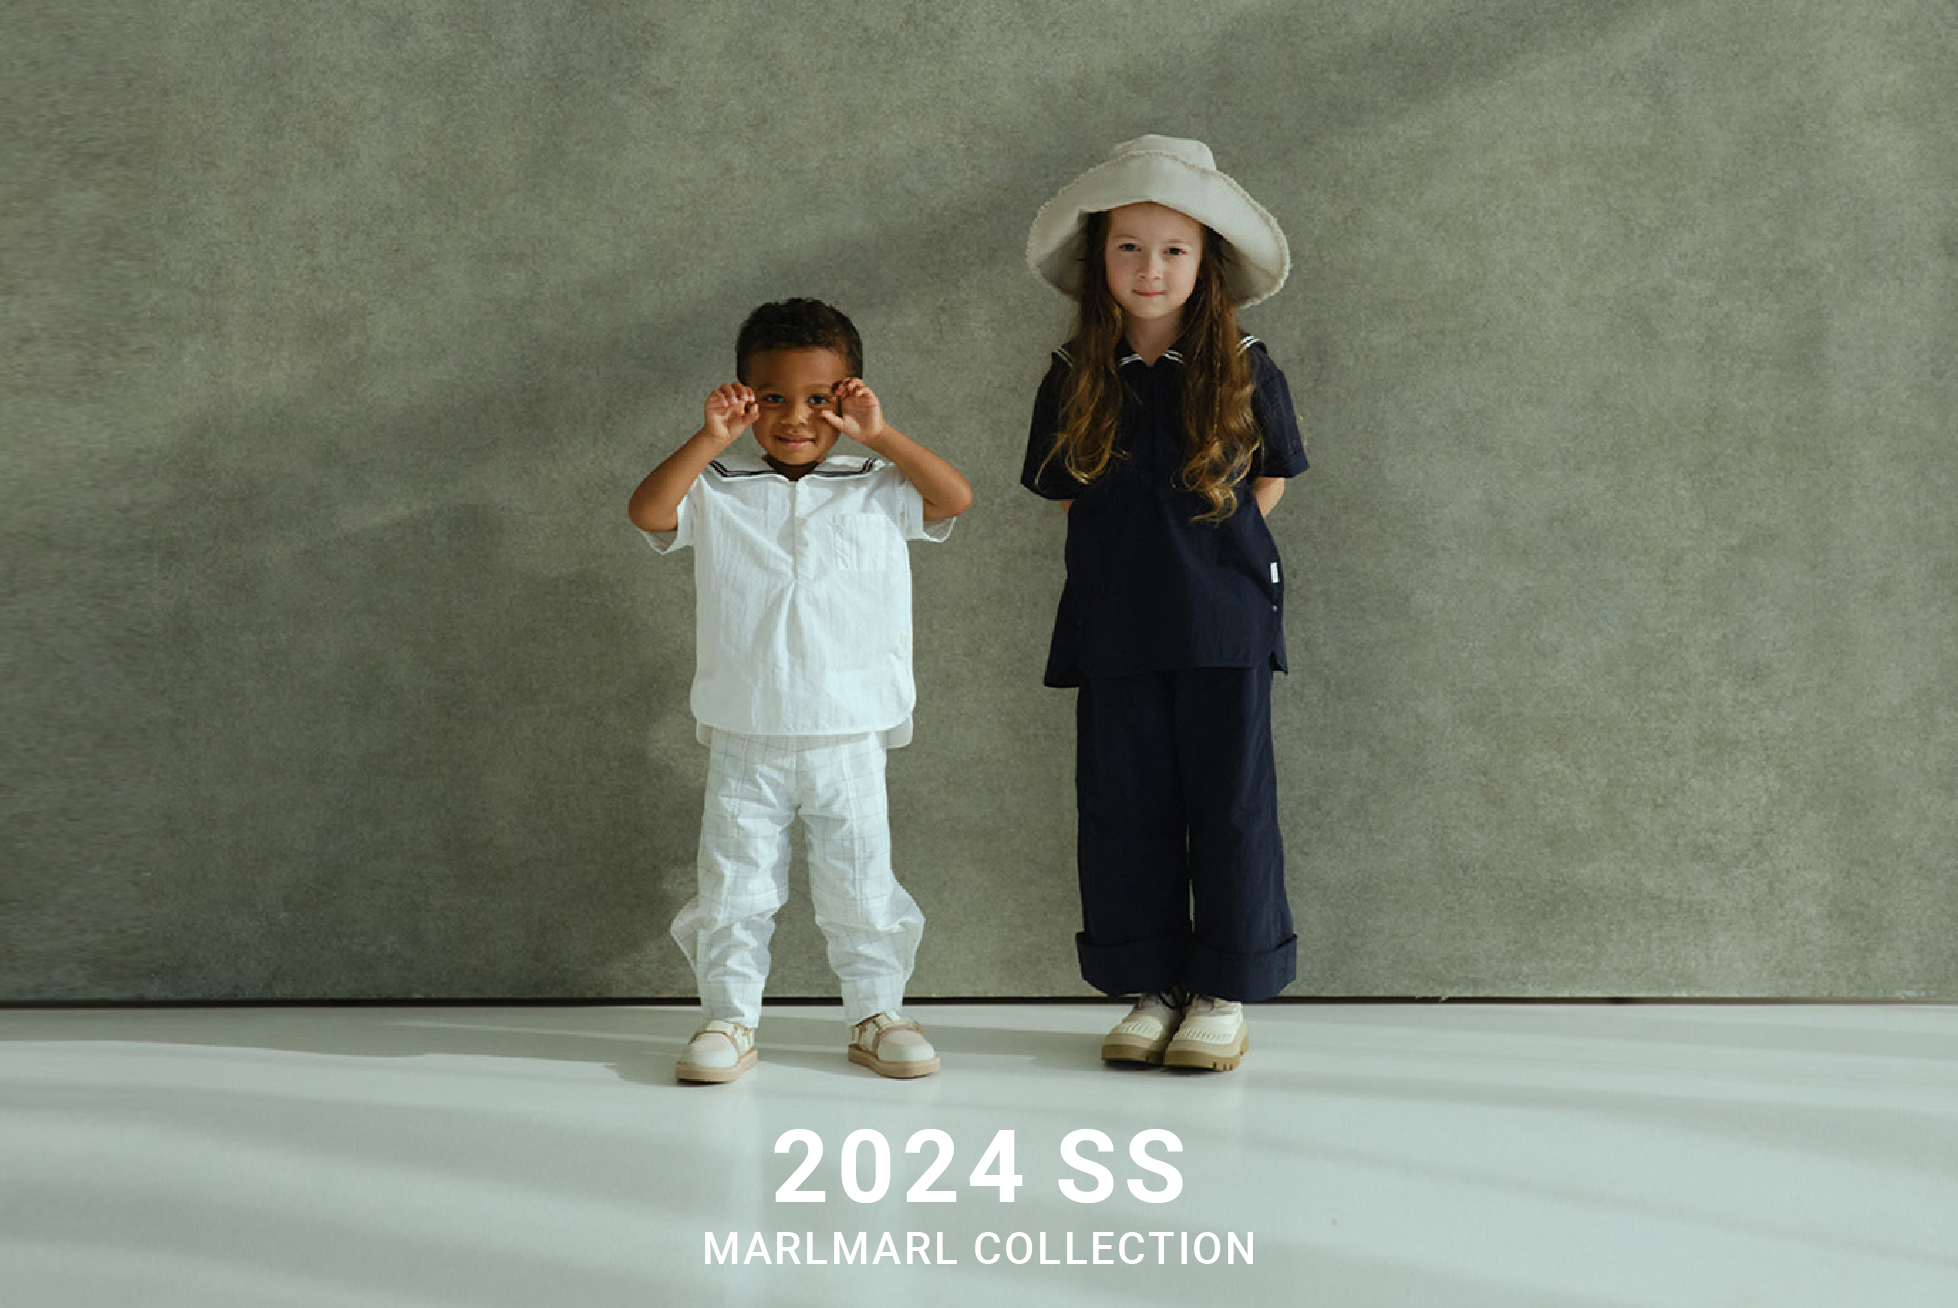 2024SS MARLMARL COLLECTION